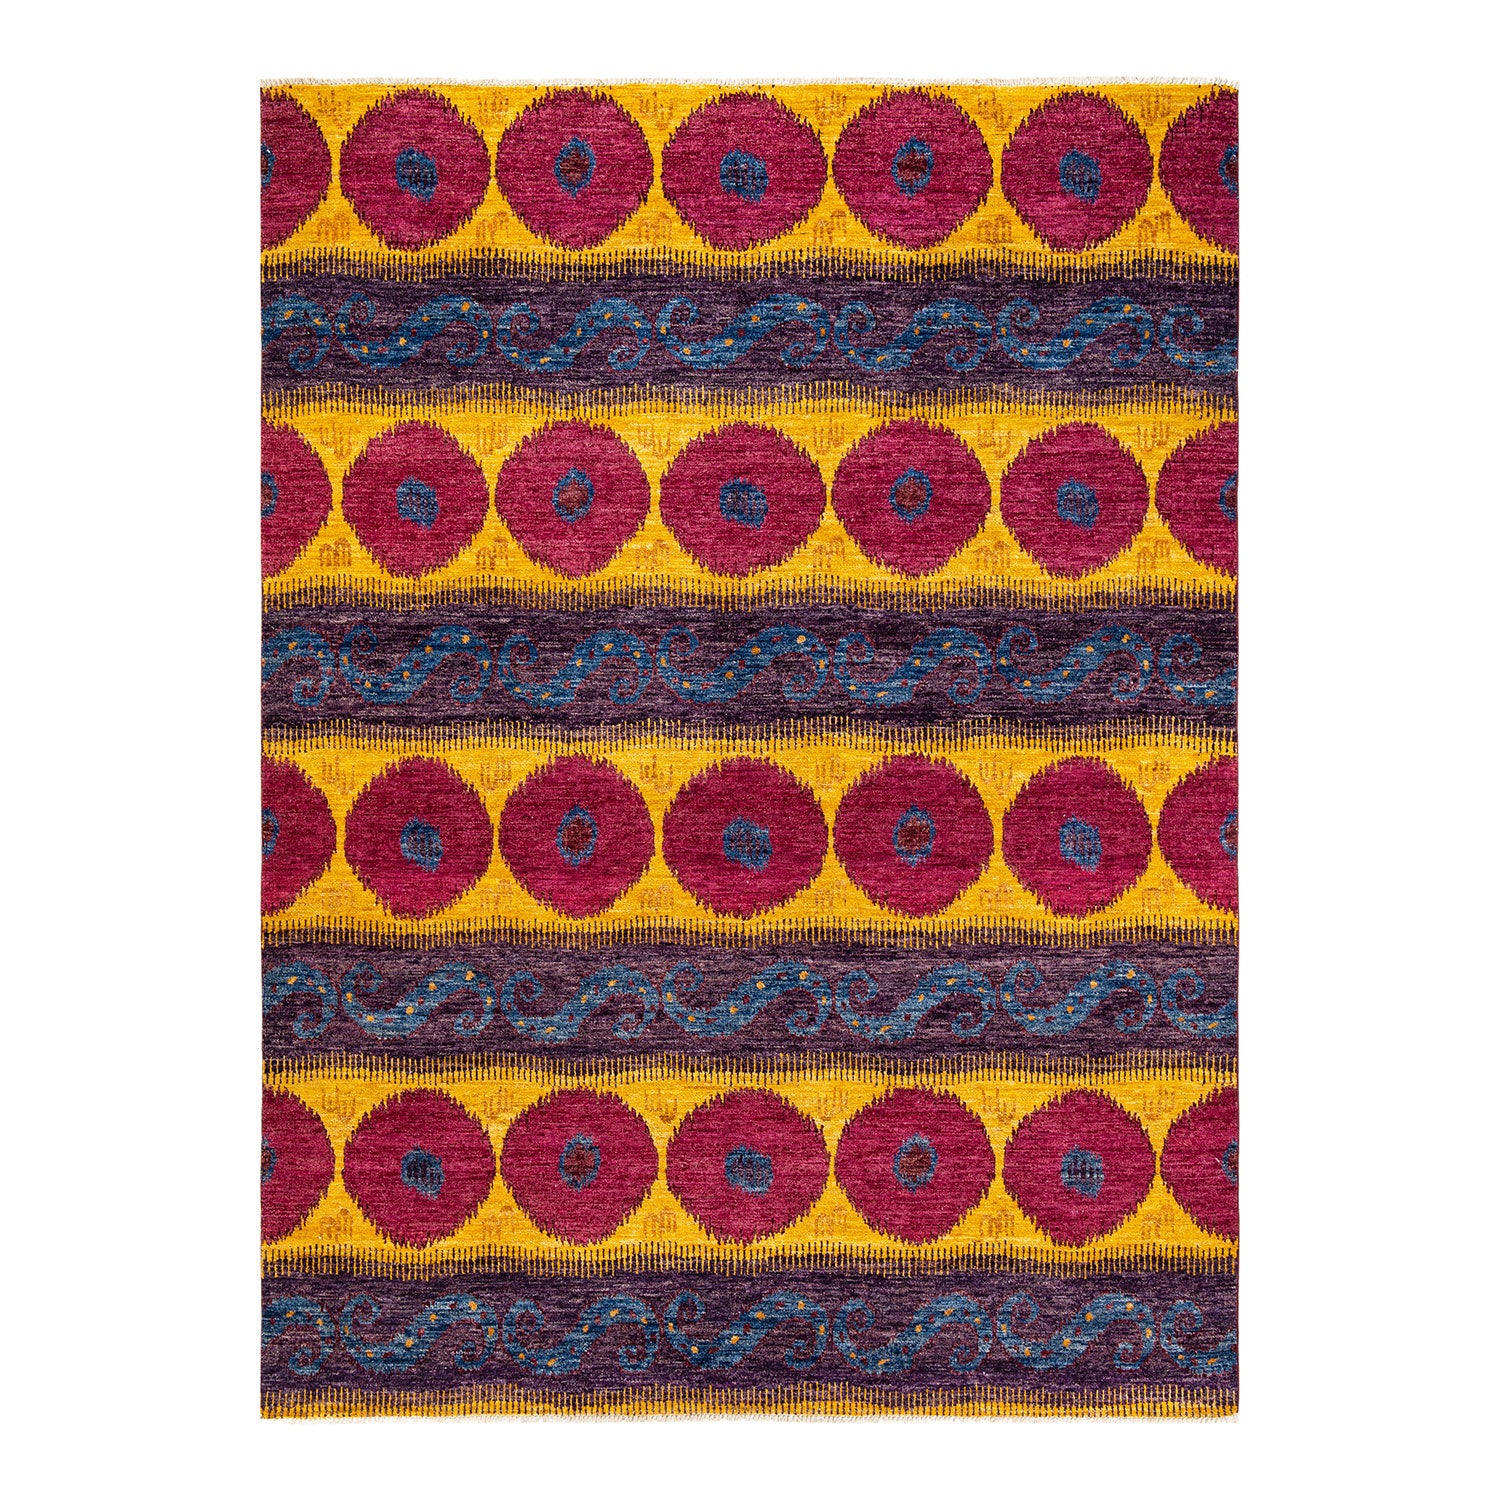 Vibrant, intricate textile with alternating stripes and ornate patterns.